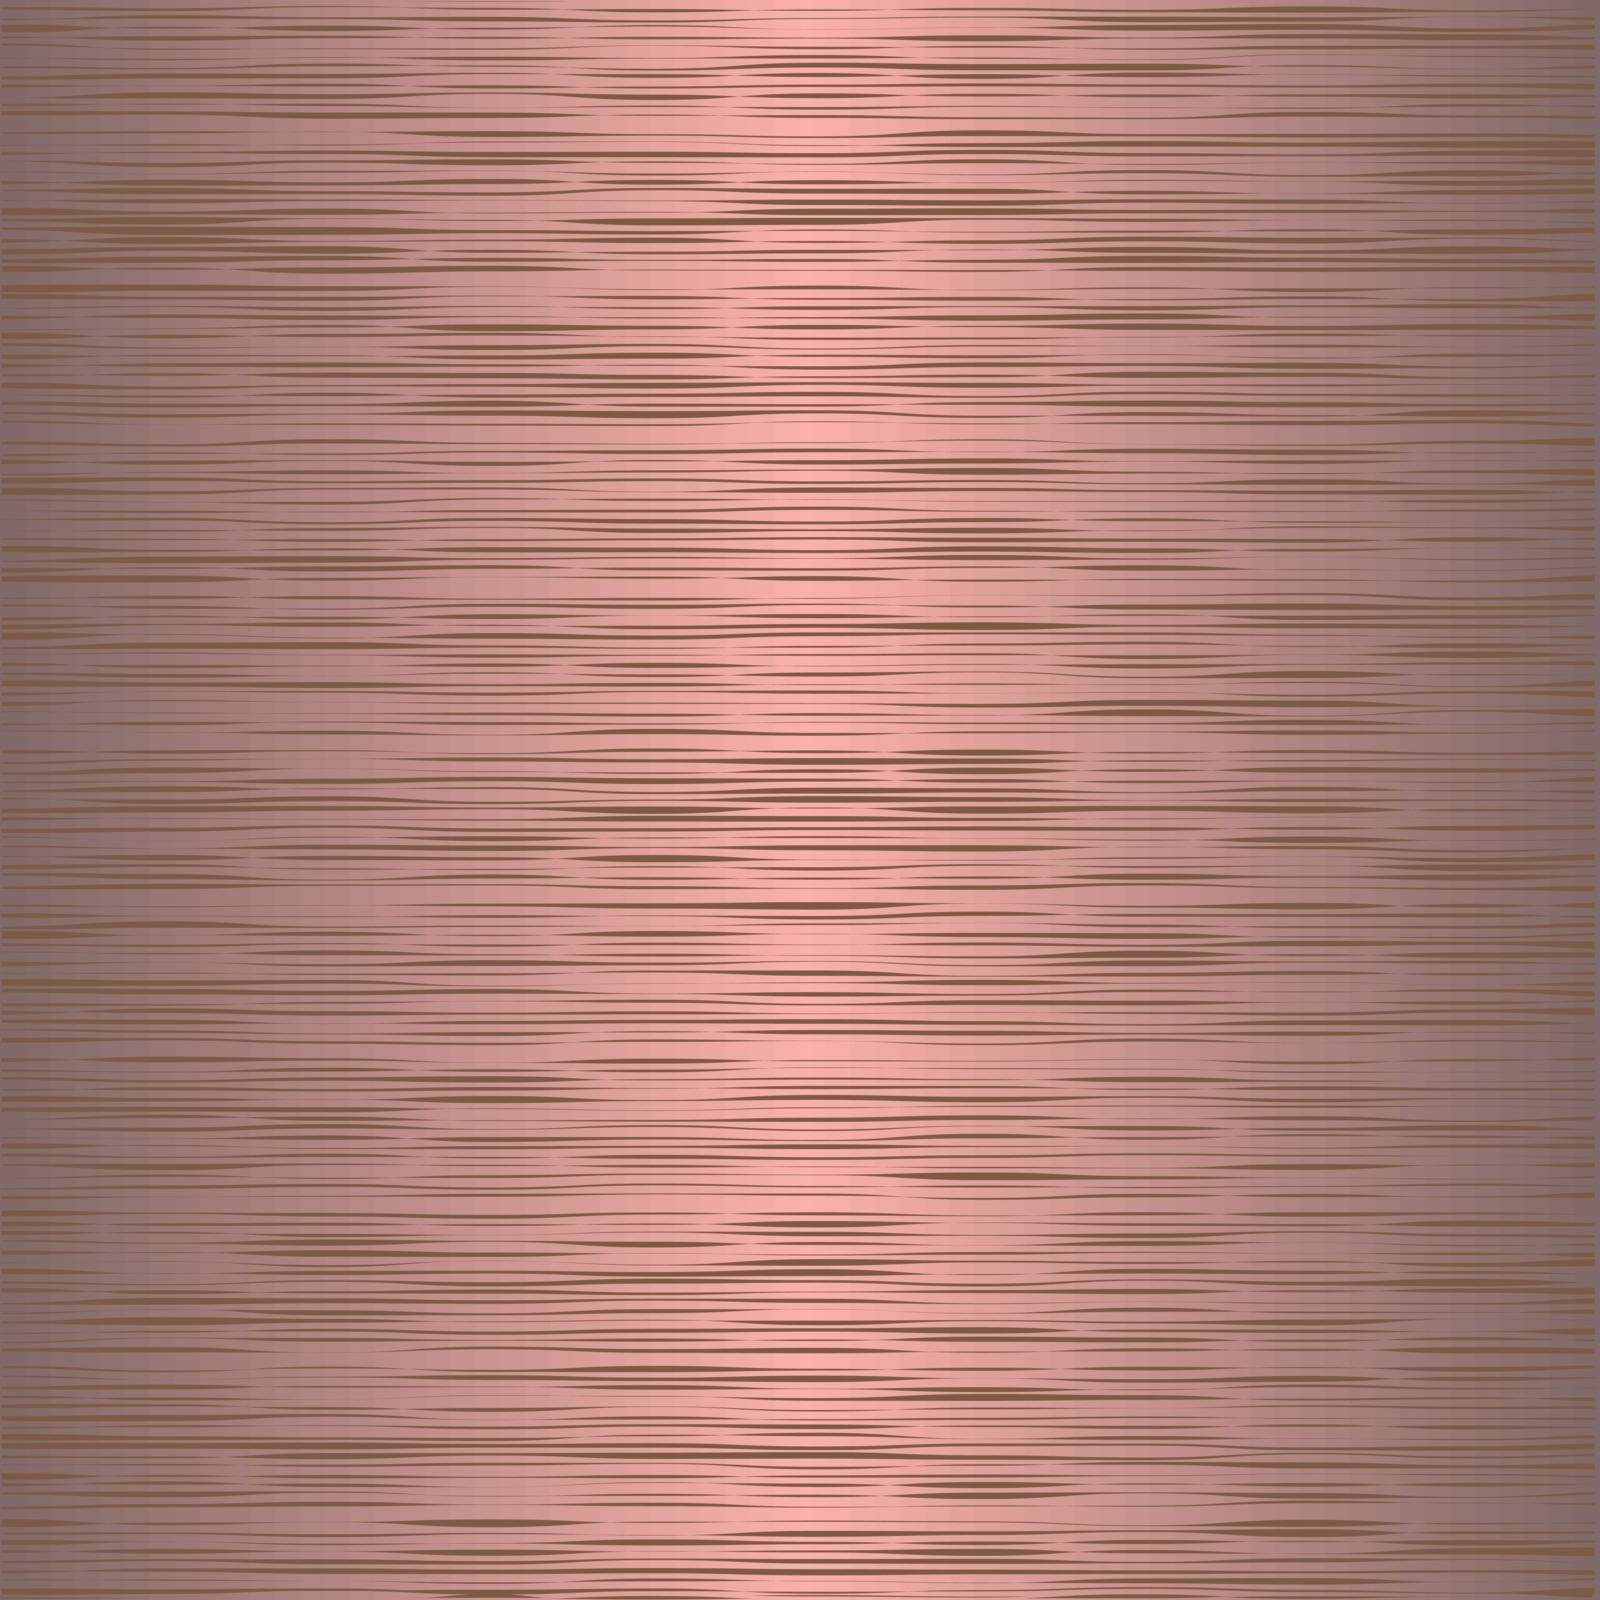 Brown Metal Background. Abstract Brown Line Background.